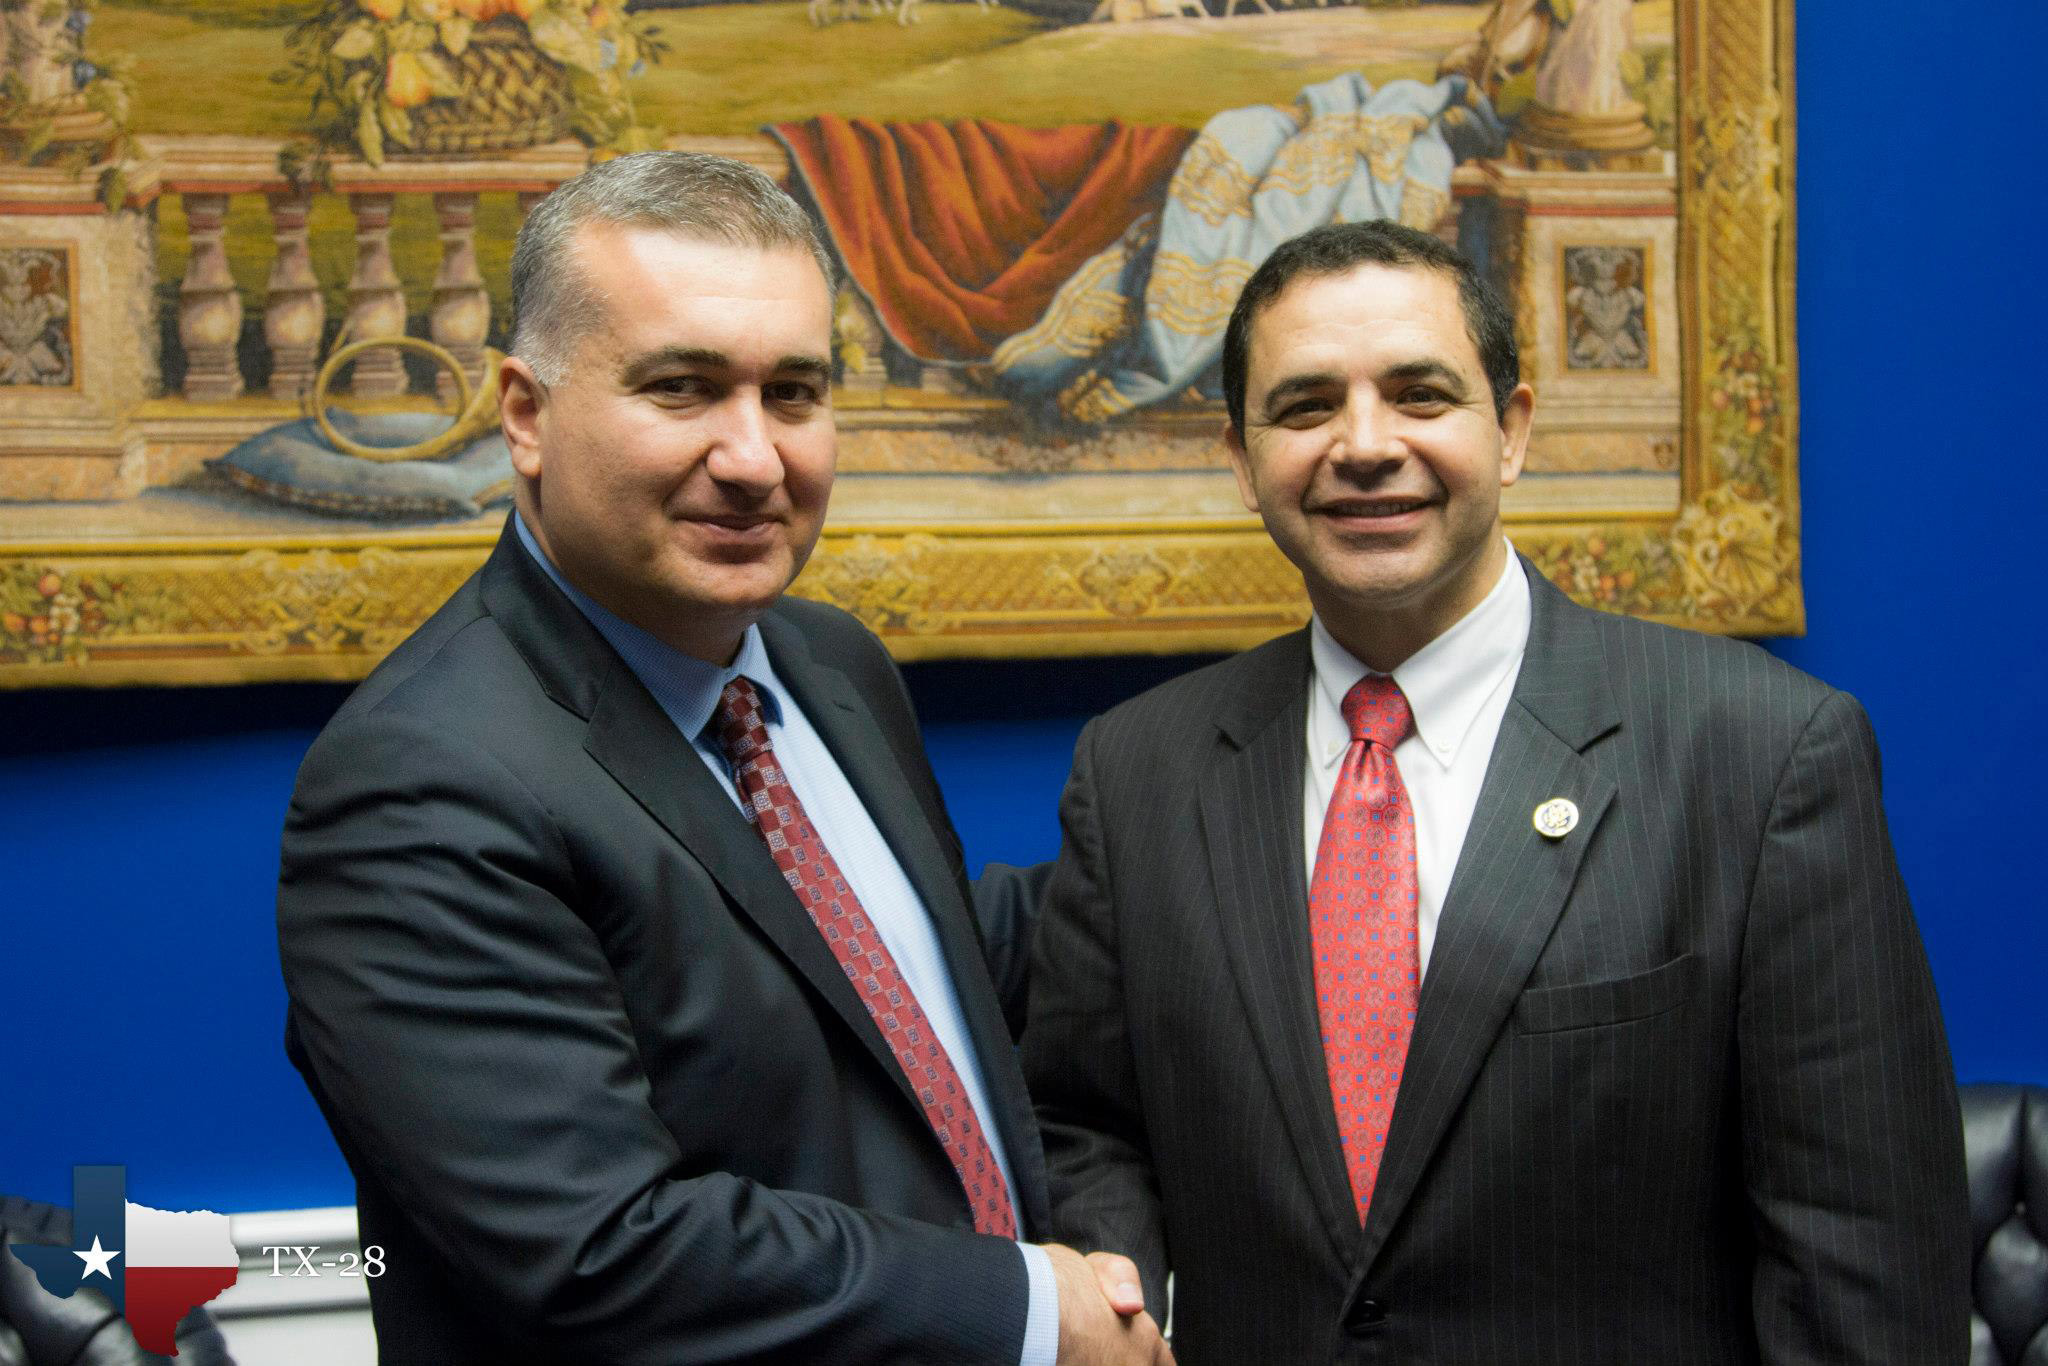 PHOTO: In a May 2013 photo from the website of Rep. Henry Cuellar (D-Texas), Cuellar meets with Elin Suleymanov, Ambassador of Azerbaijan. Cuellar has served as a co-chair of the Congressional Azerbaijan Caucus. 